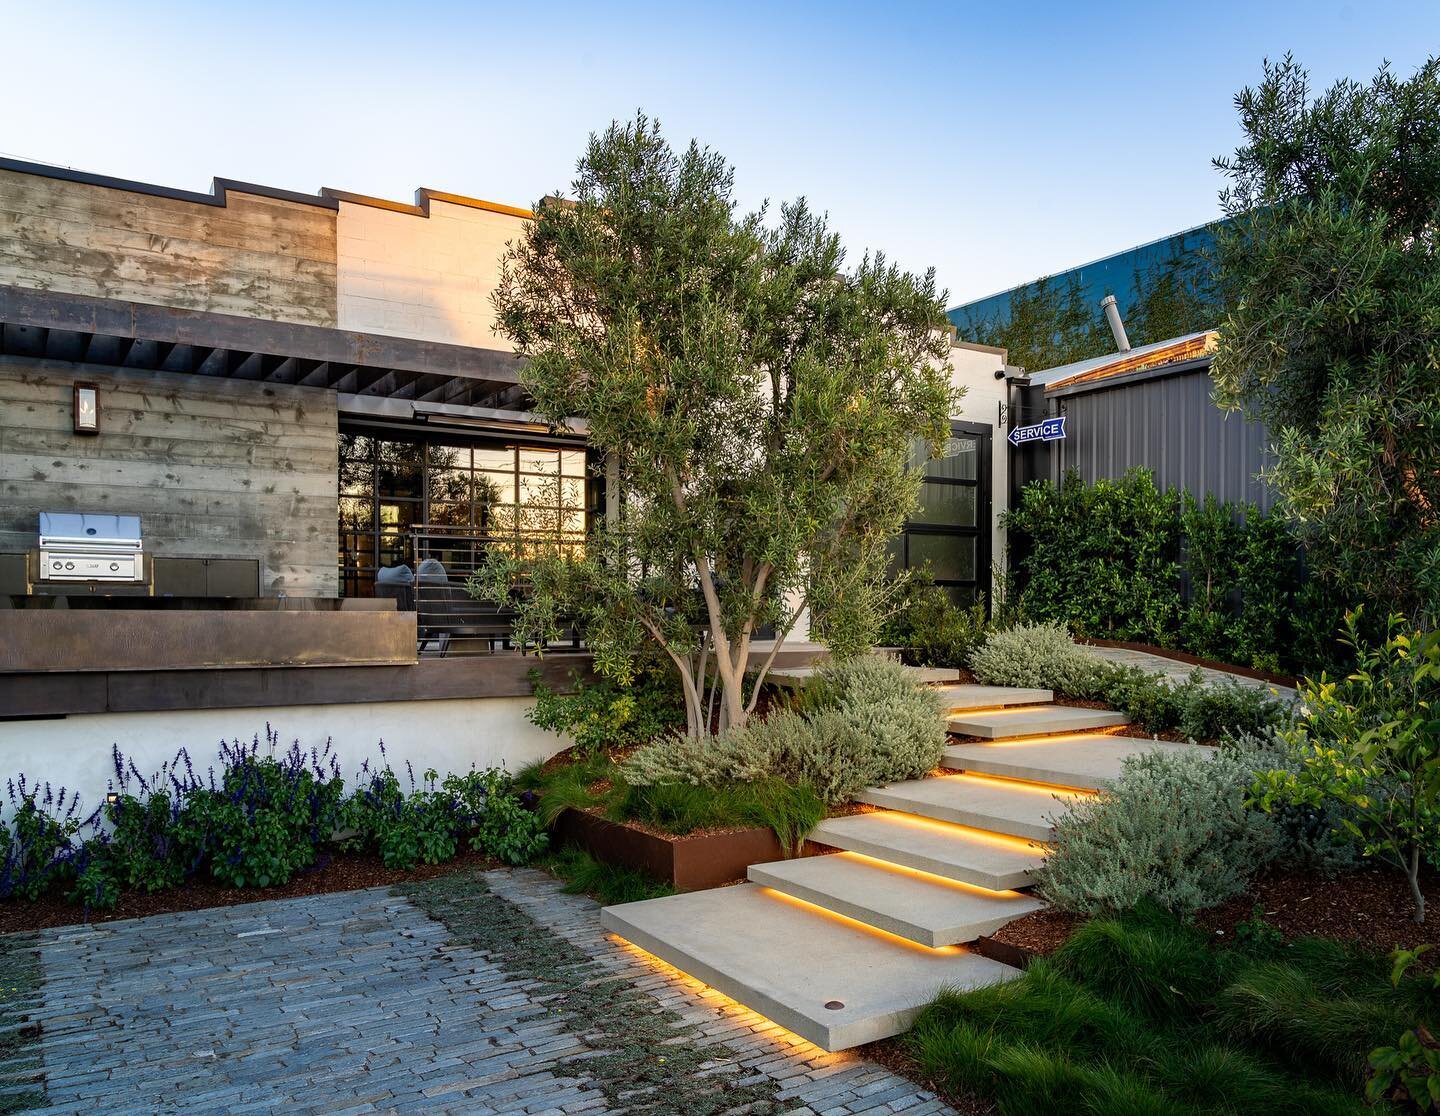 We are getting closer to summer and wonderful long days here in LA. The backyard of this private office building is the perfect place to enjoy a serene evening. Walk up the floating steps and hang out on the expansive deck.
.
.
.
Landscape architect: